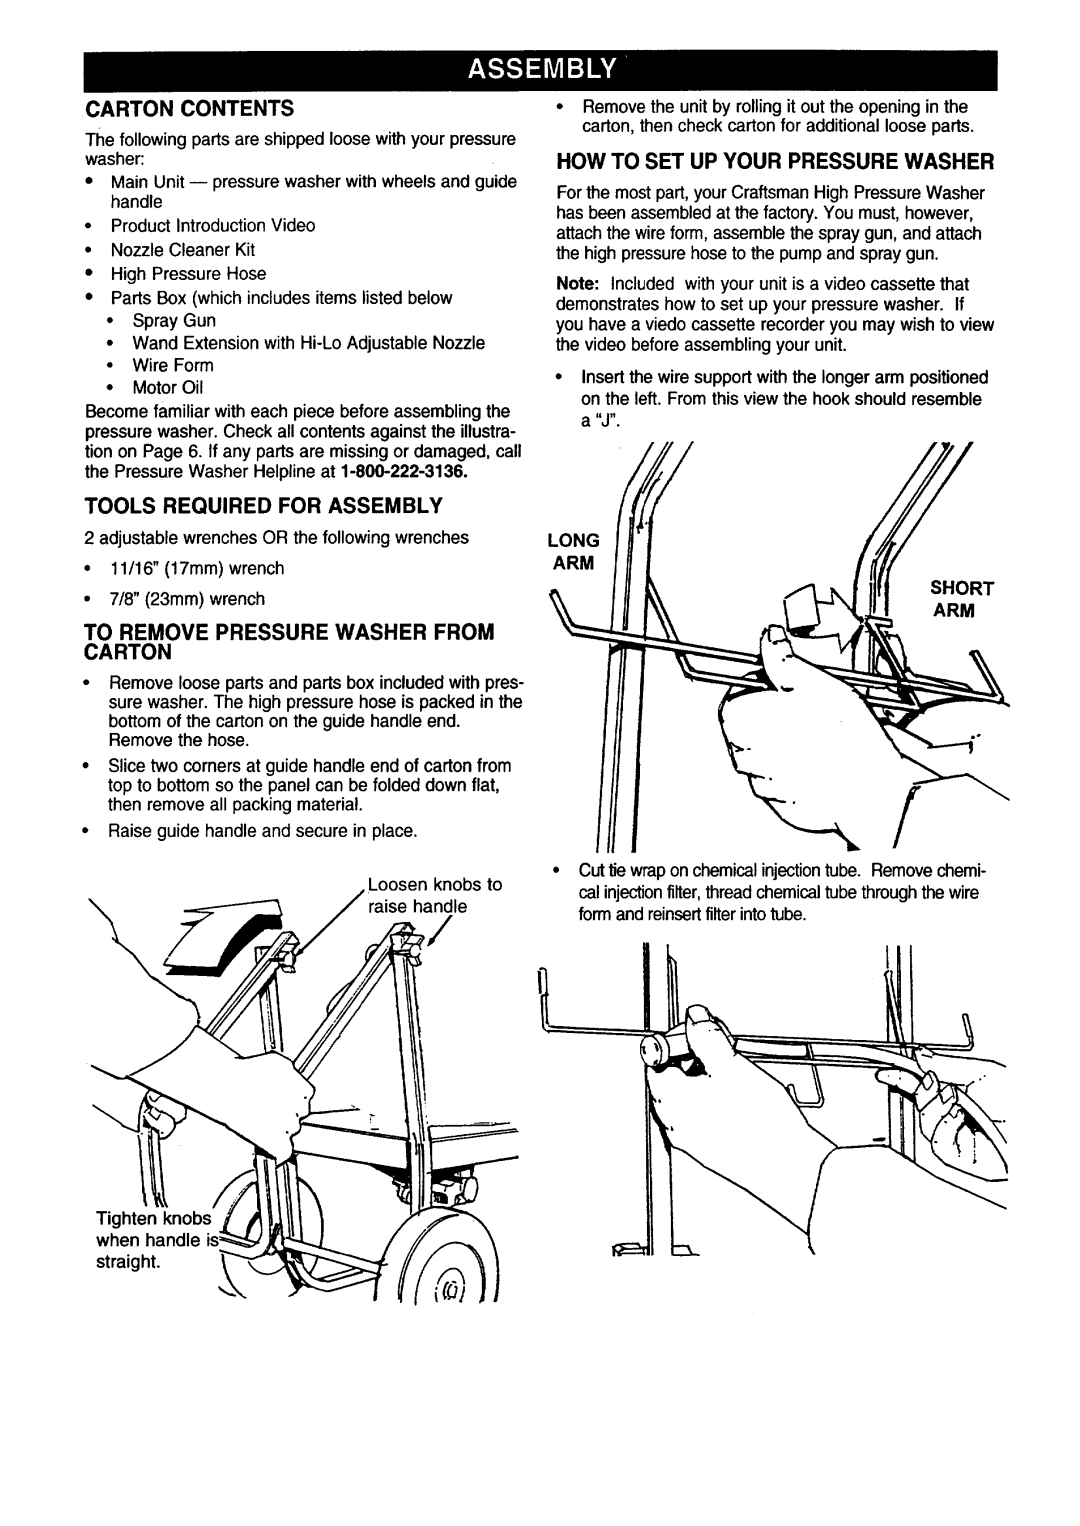 Craftsman 580.76225 owner manual Carton Contents, How To Set Up Your Pressure Washer, Tools Required For Assembly 